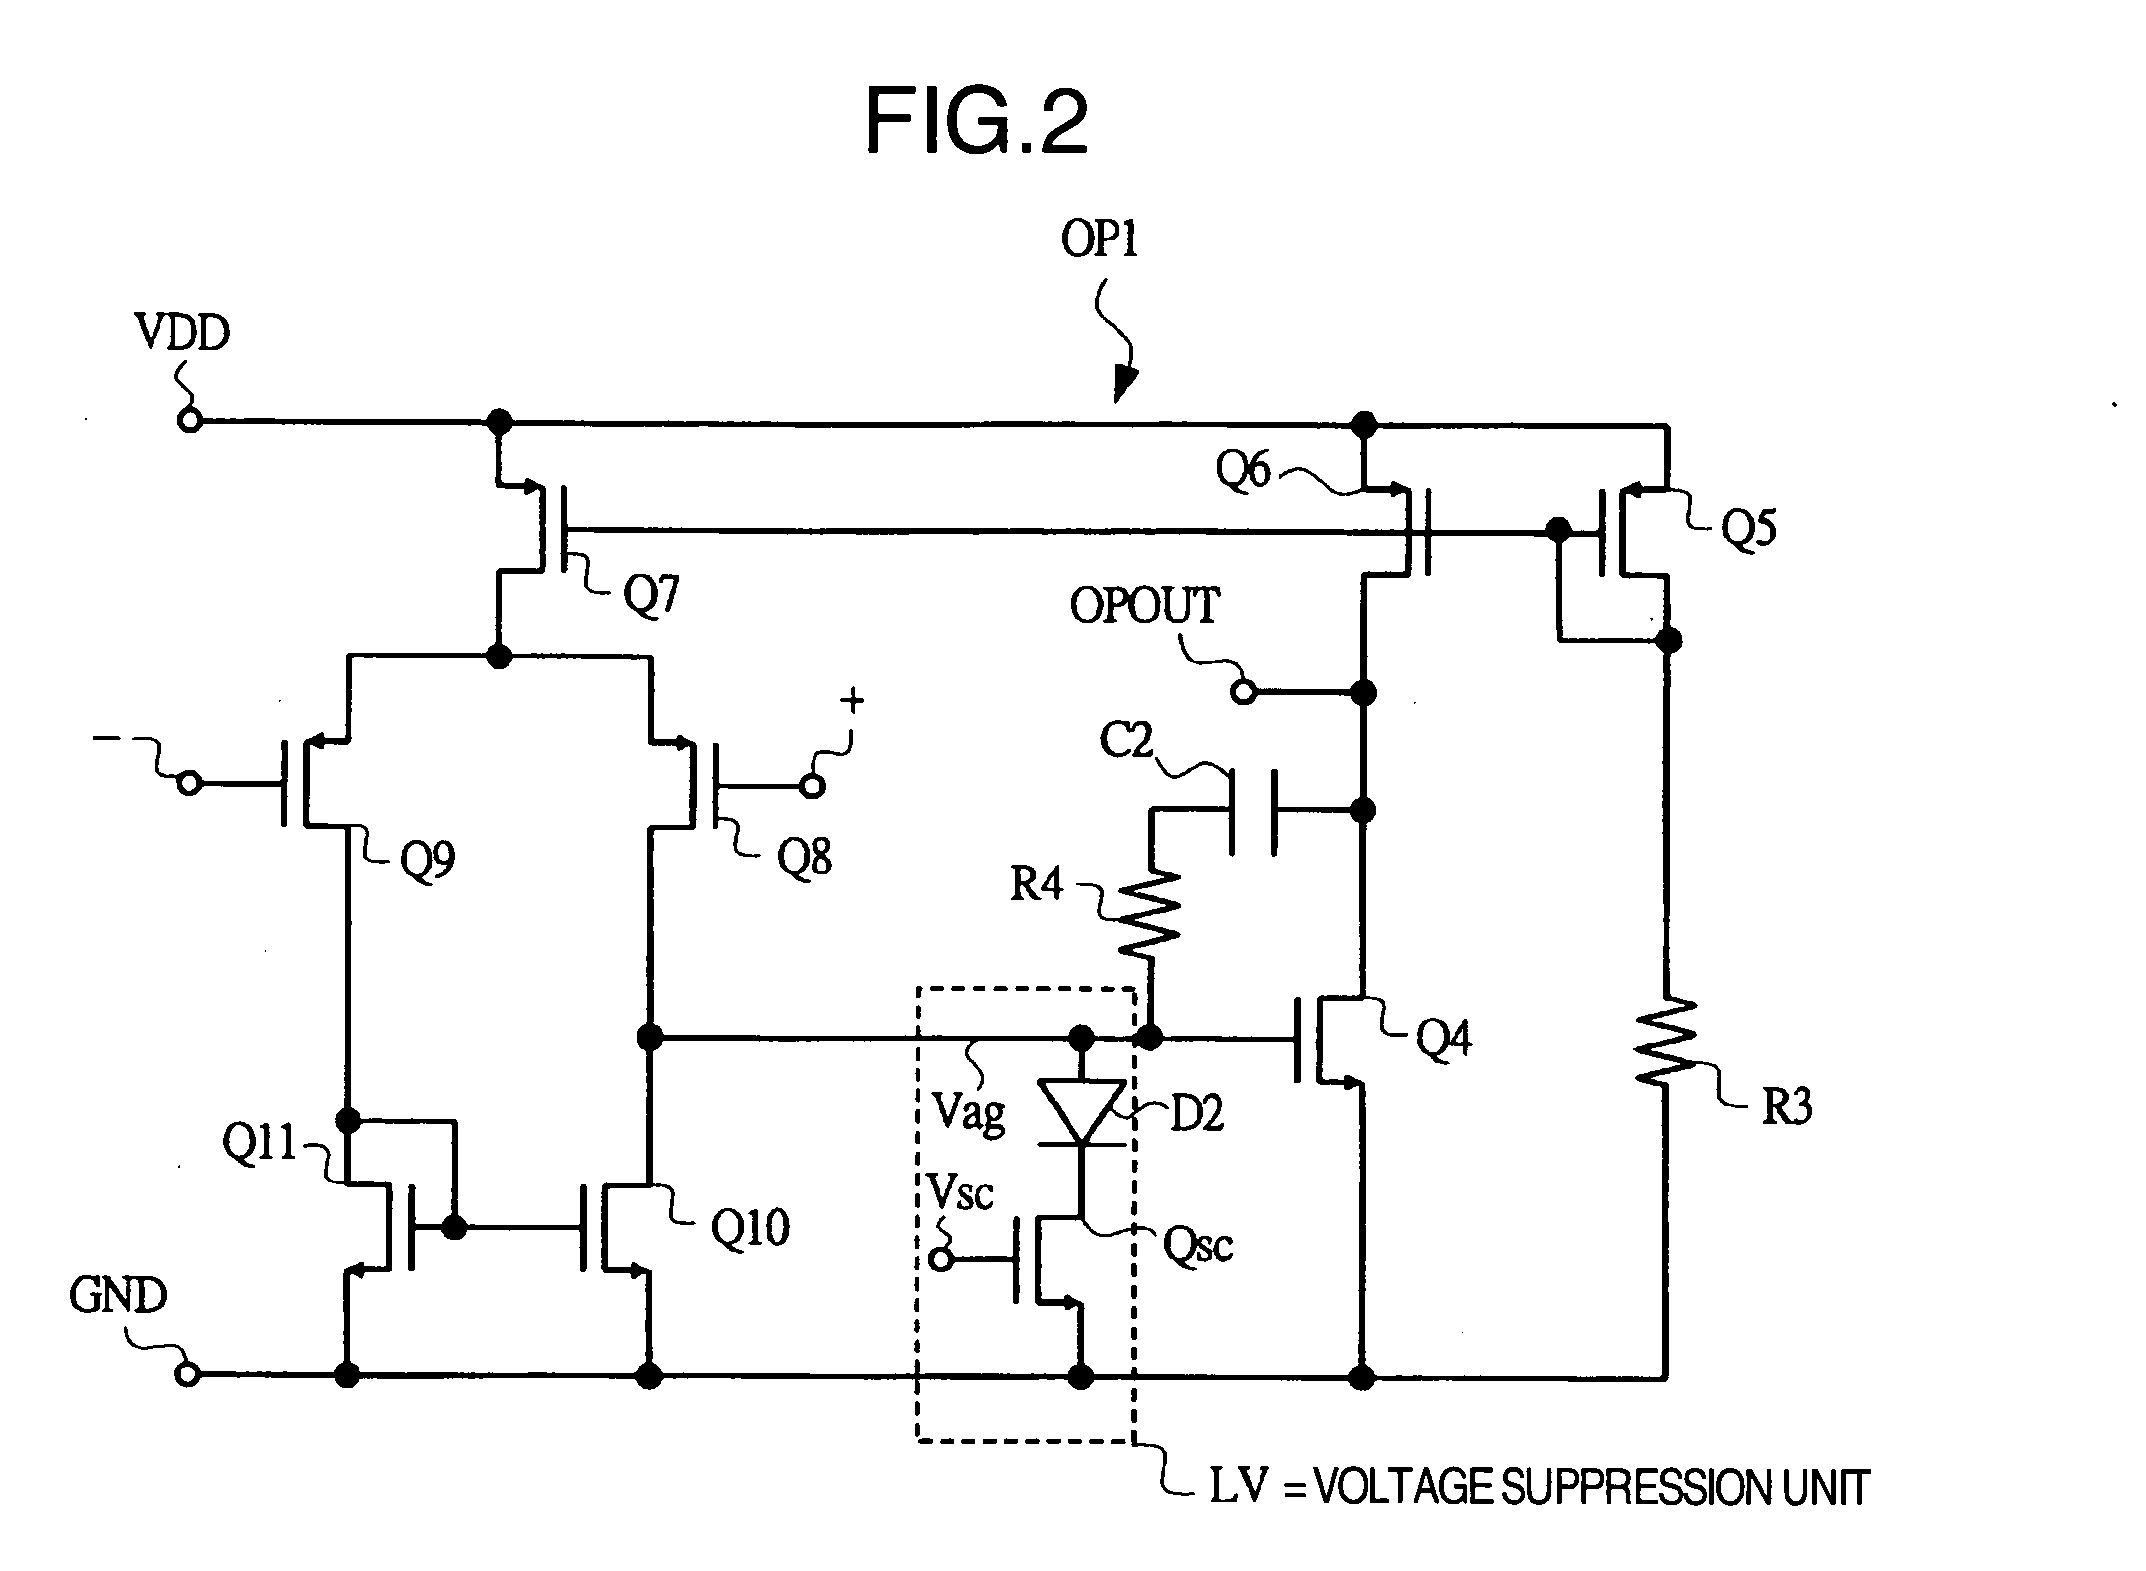 Power supply driver circuit